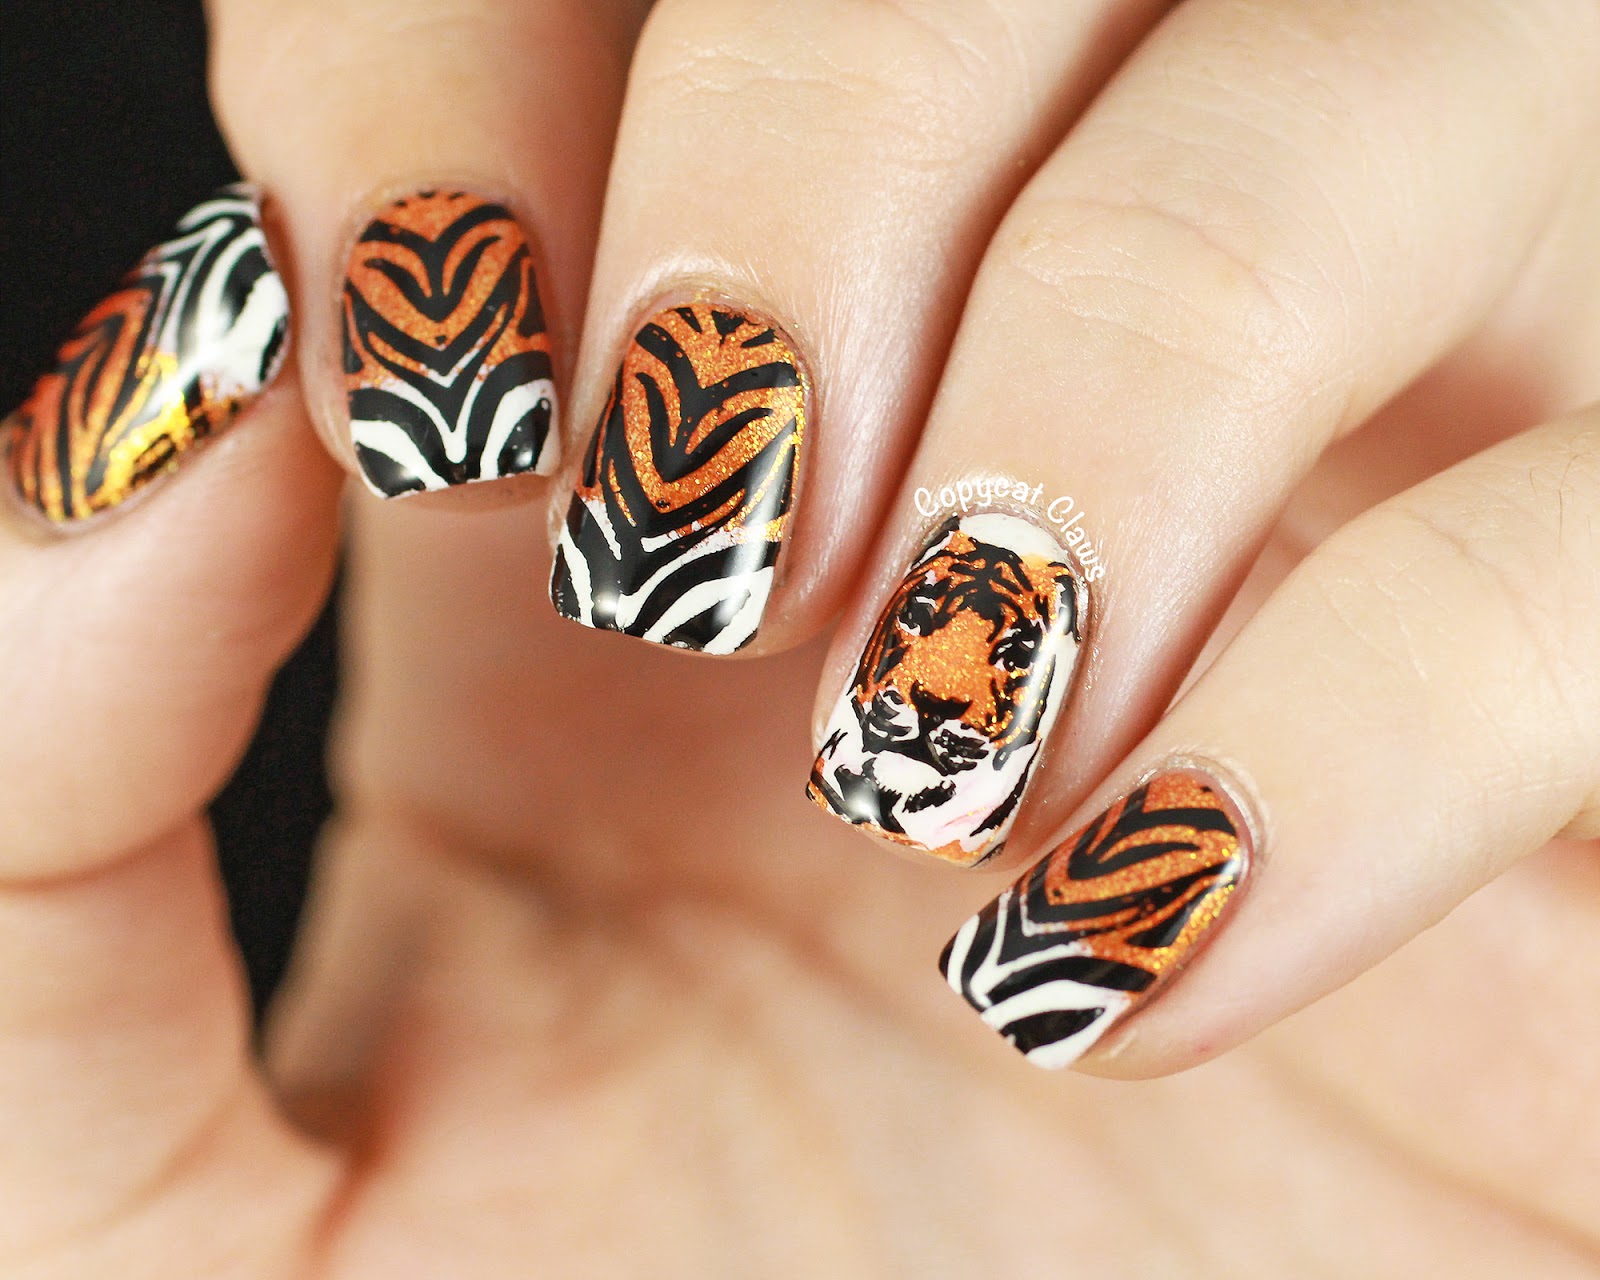 9. Tiger Lily Nail Art Designs for Short Nails - wide 7